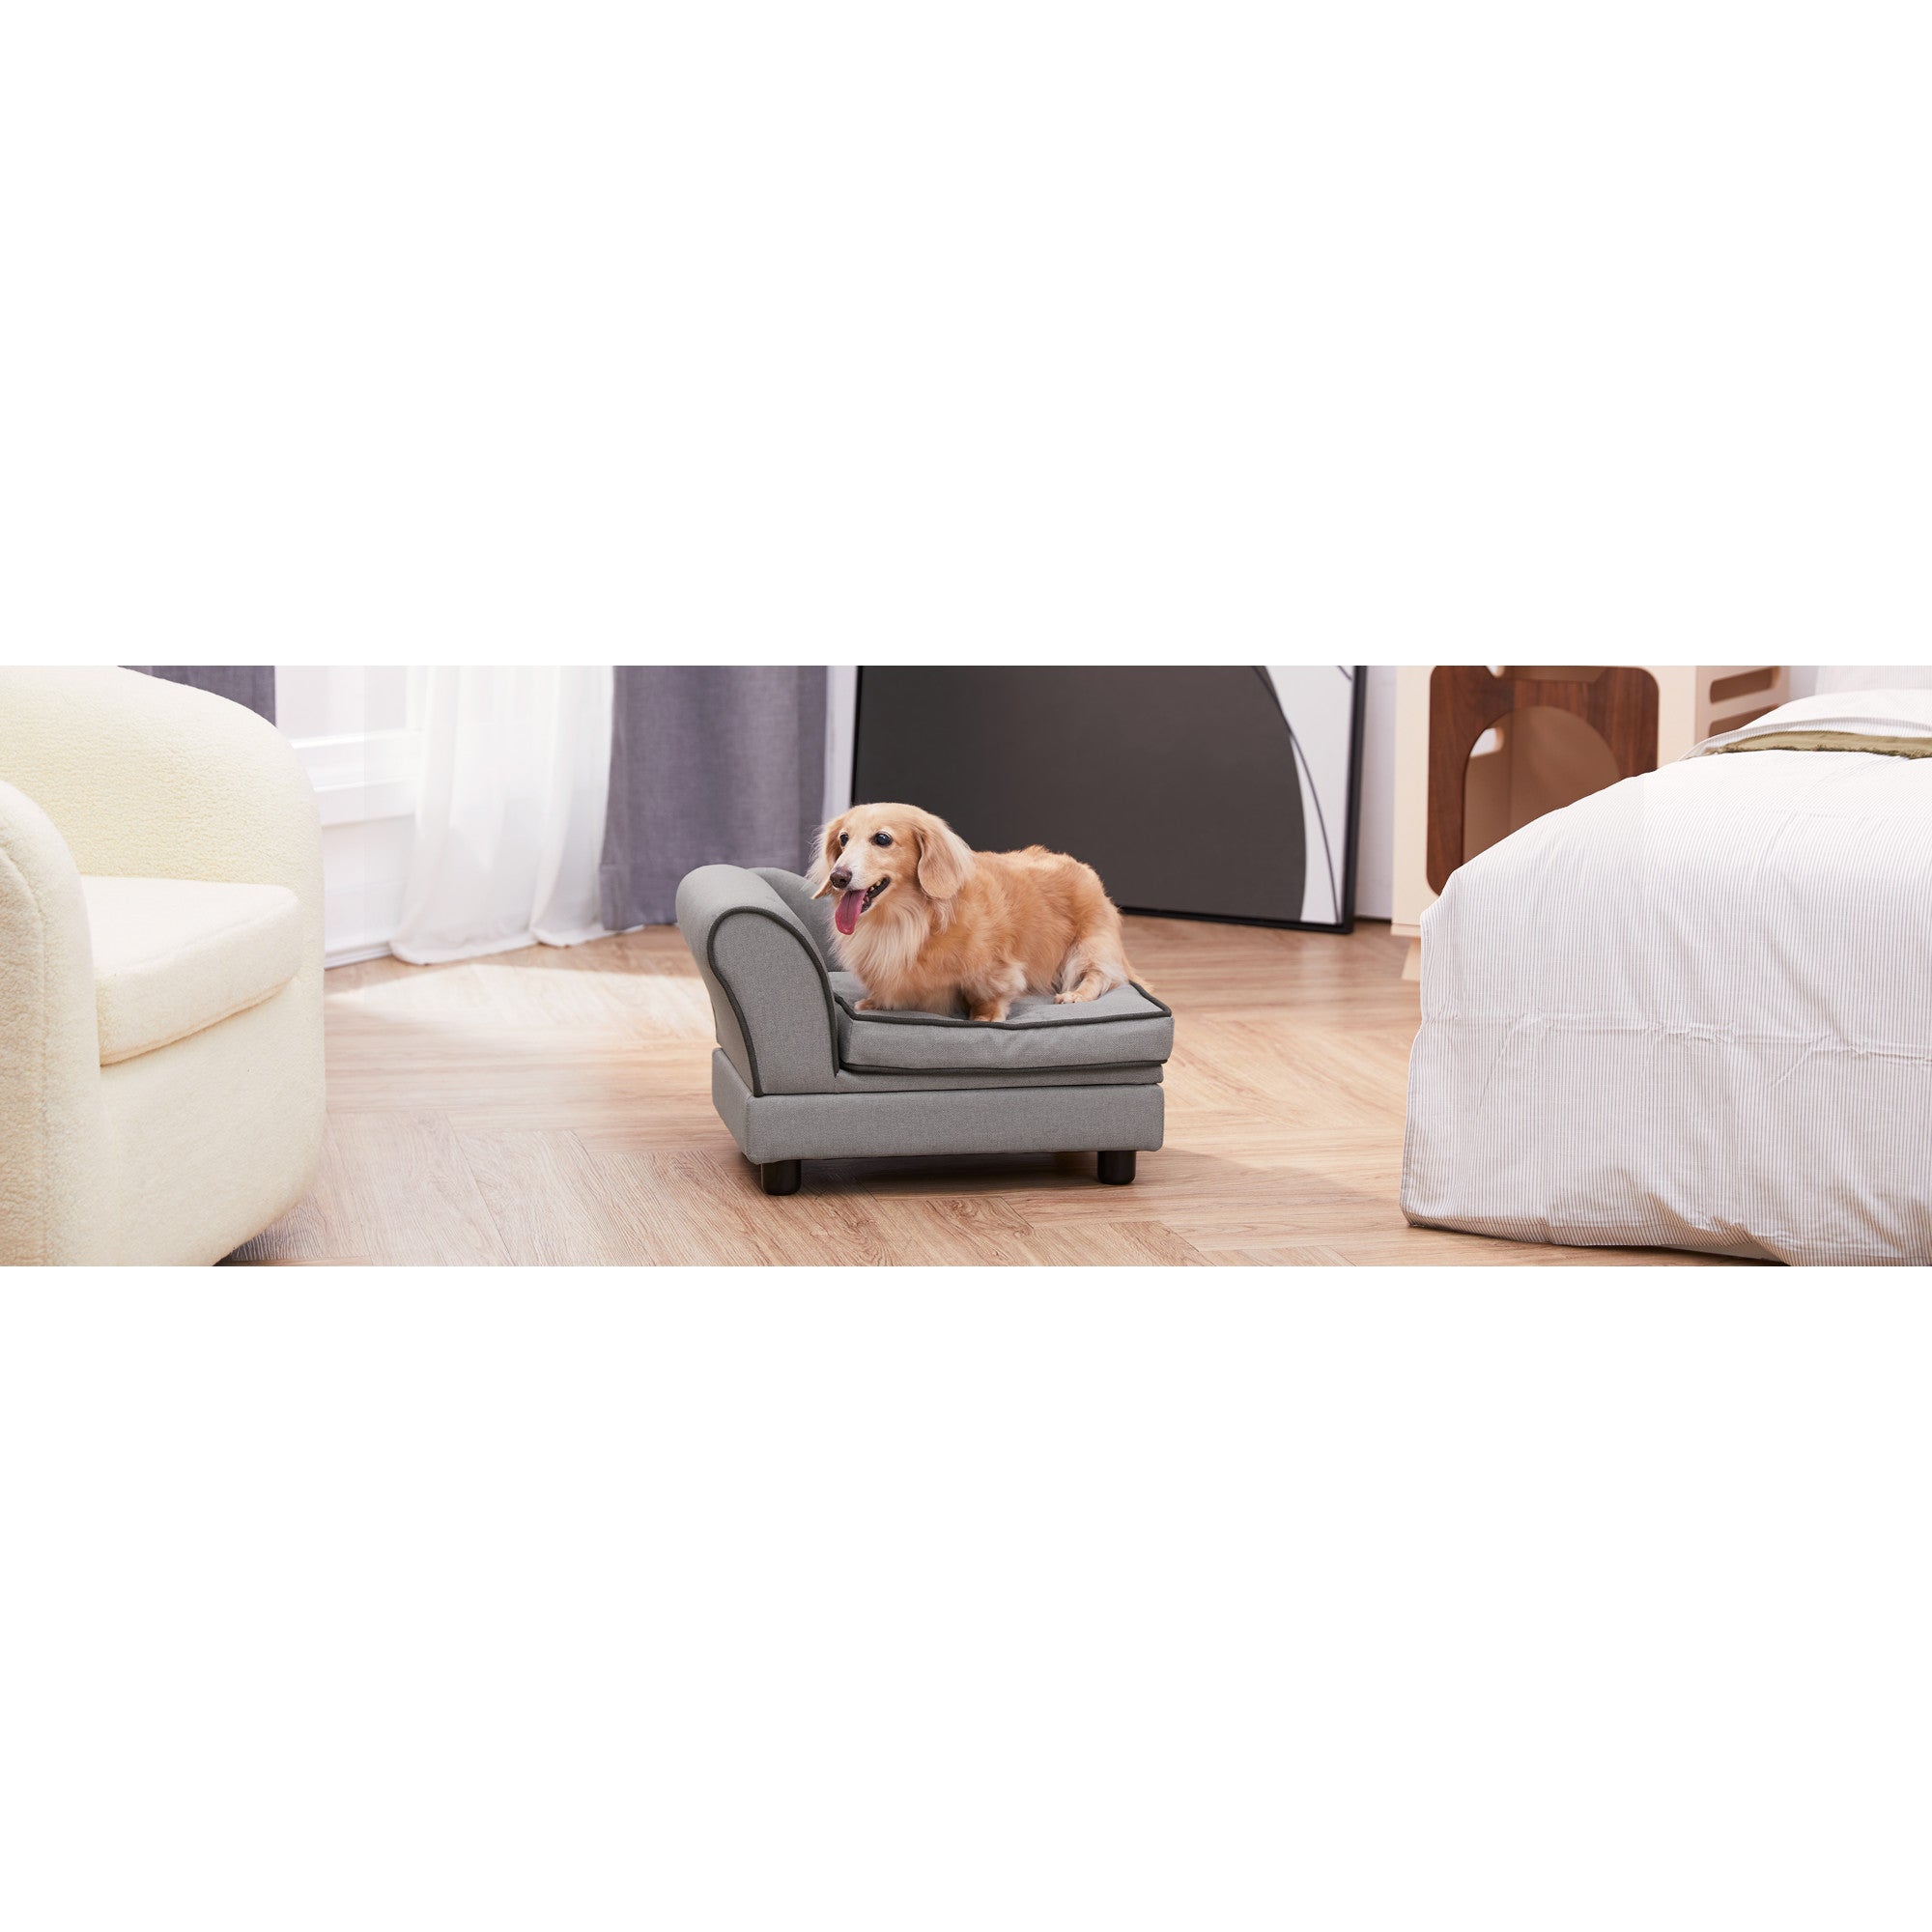 Teamson Pets Ivan Chaise Lounge Dog Bed with Storage for Cats & Extra-Small Dogs, Gray